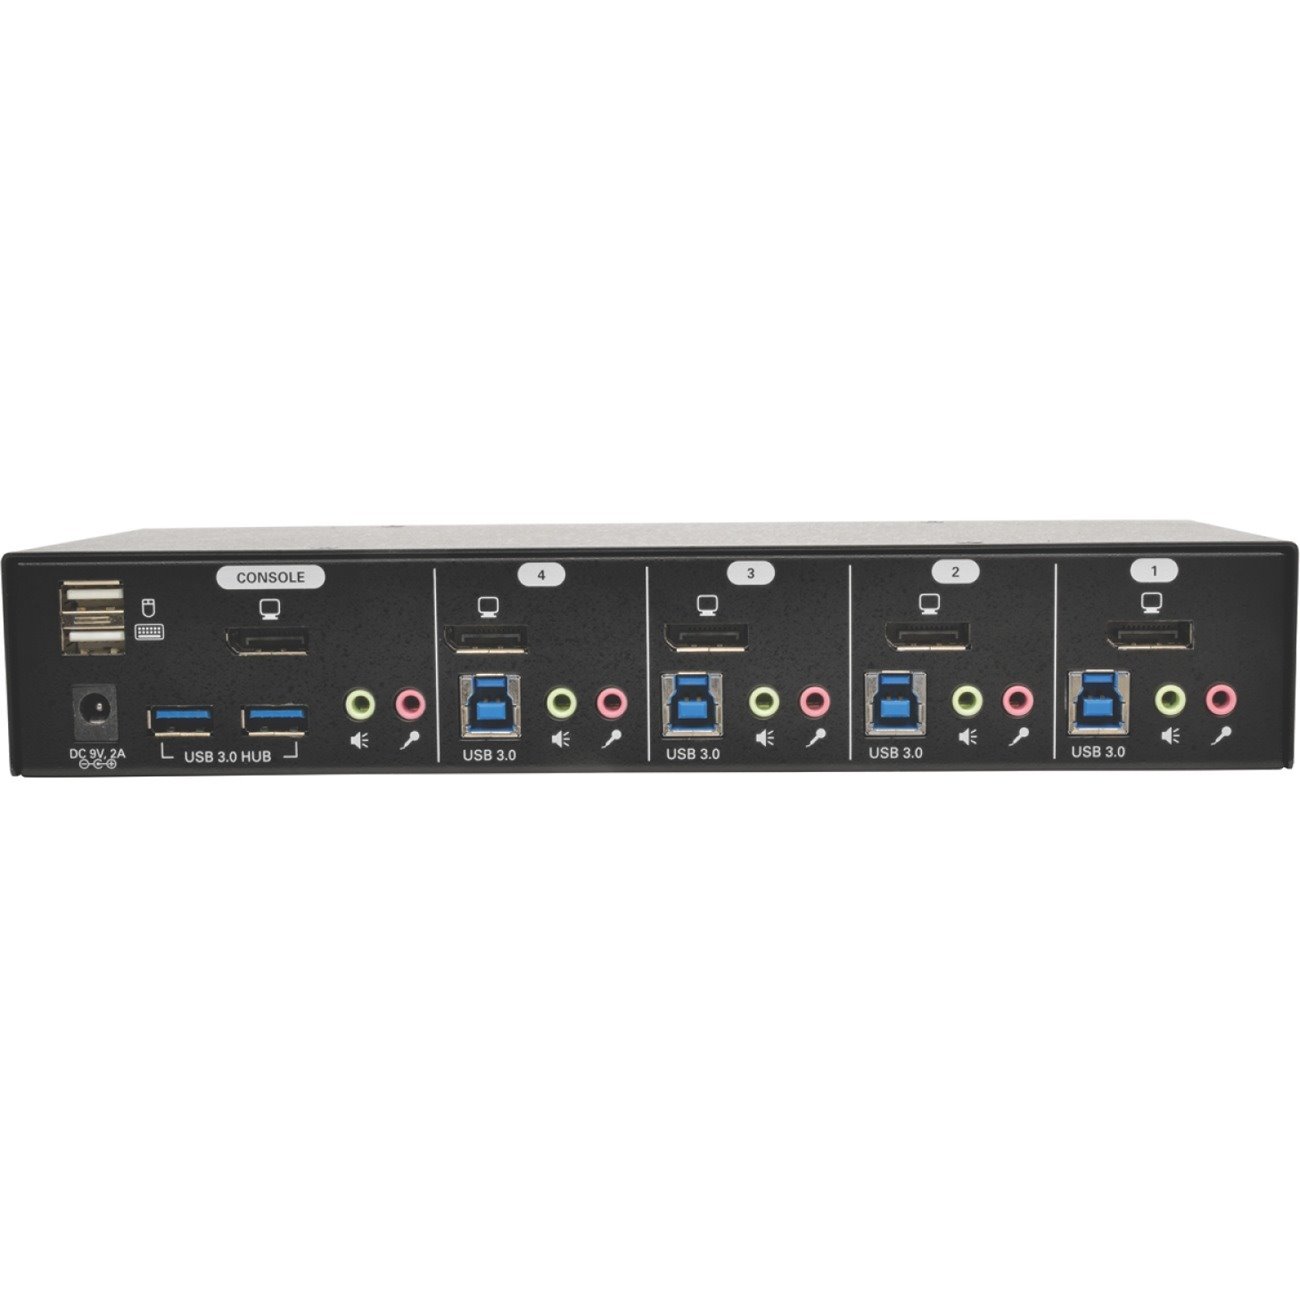 Tripp Lite by Eaton 4-Port DisplayPort KVM Switch with Audio, Cables and USB 3.0 SuperSpeed Hub